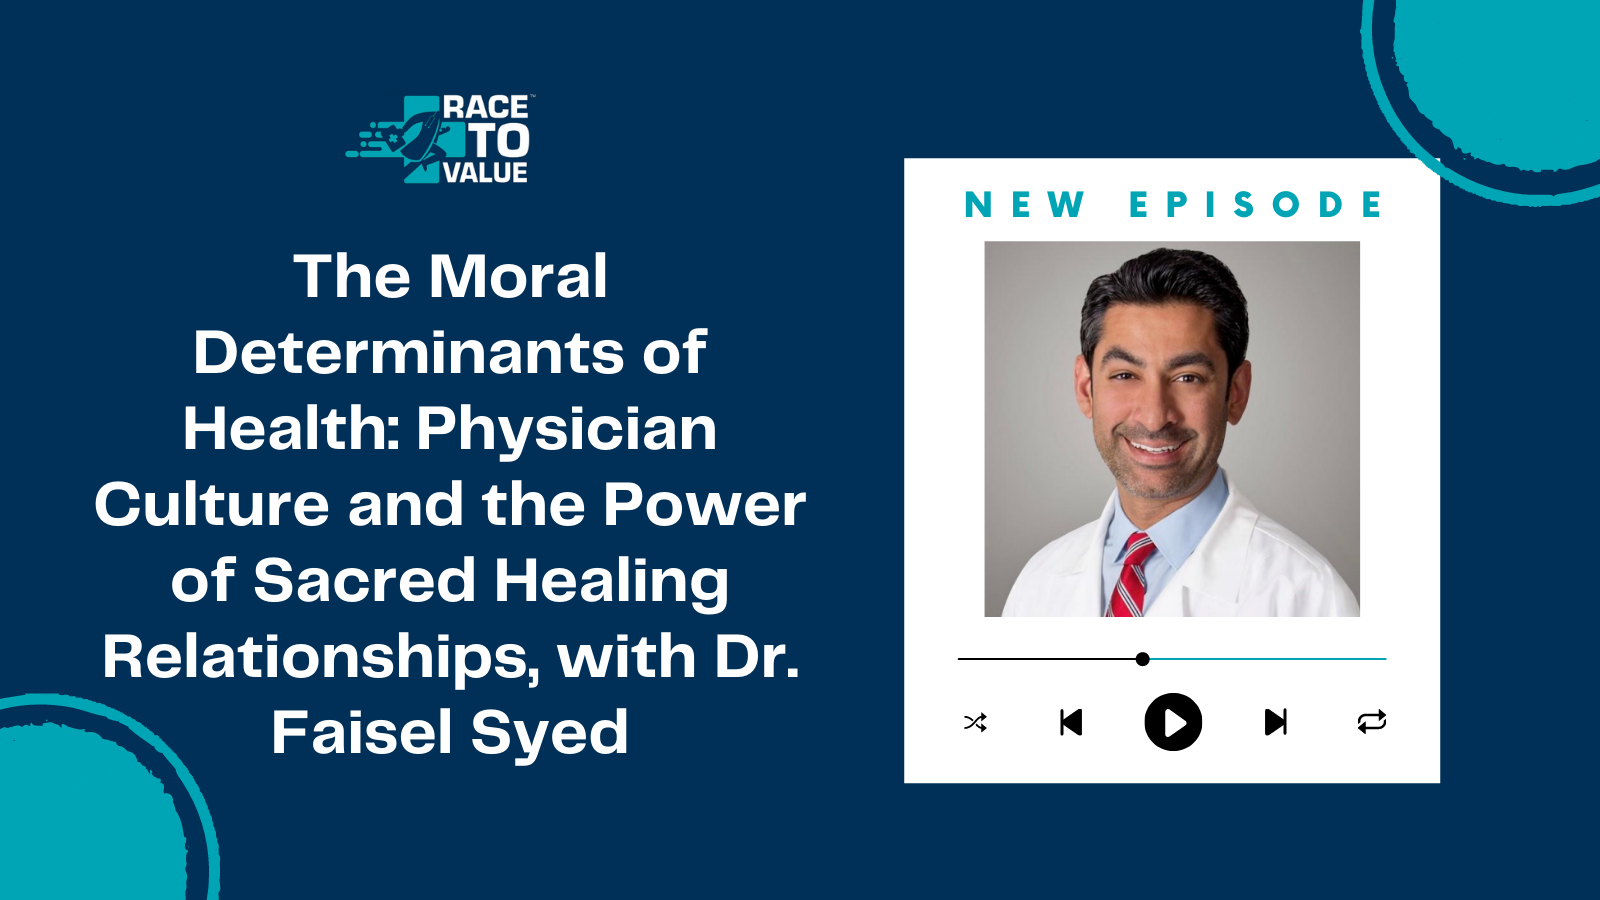 The Moral Determinants of Health: Physician Culture and the Value of Healing Relationships, with Dr. Faisel Syed